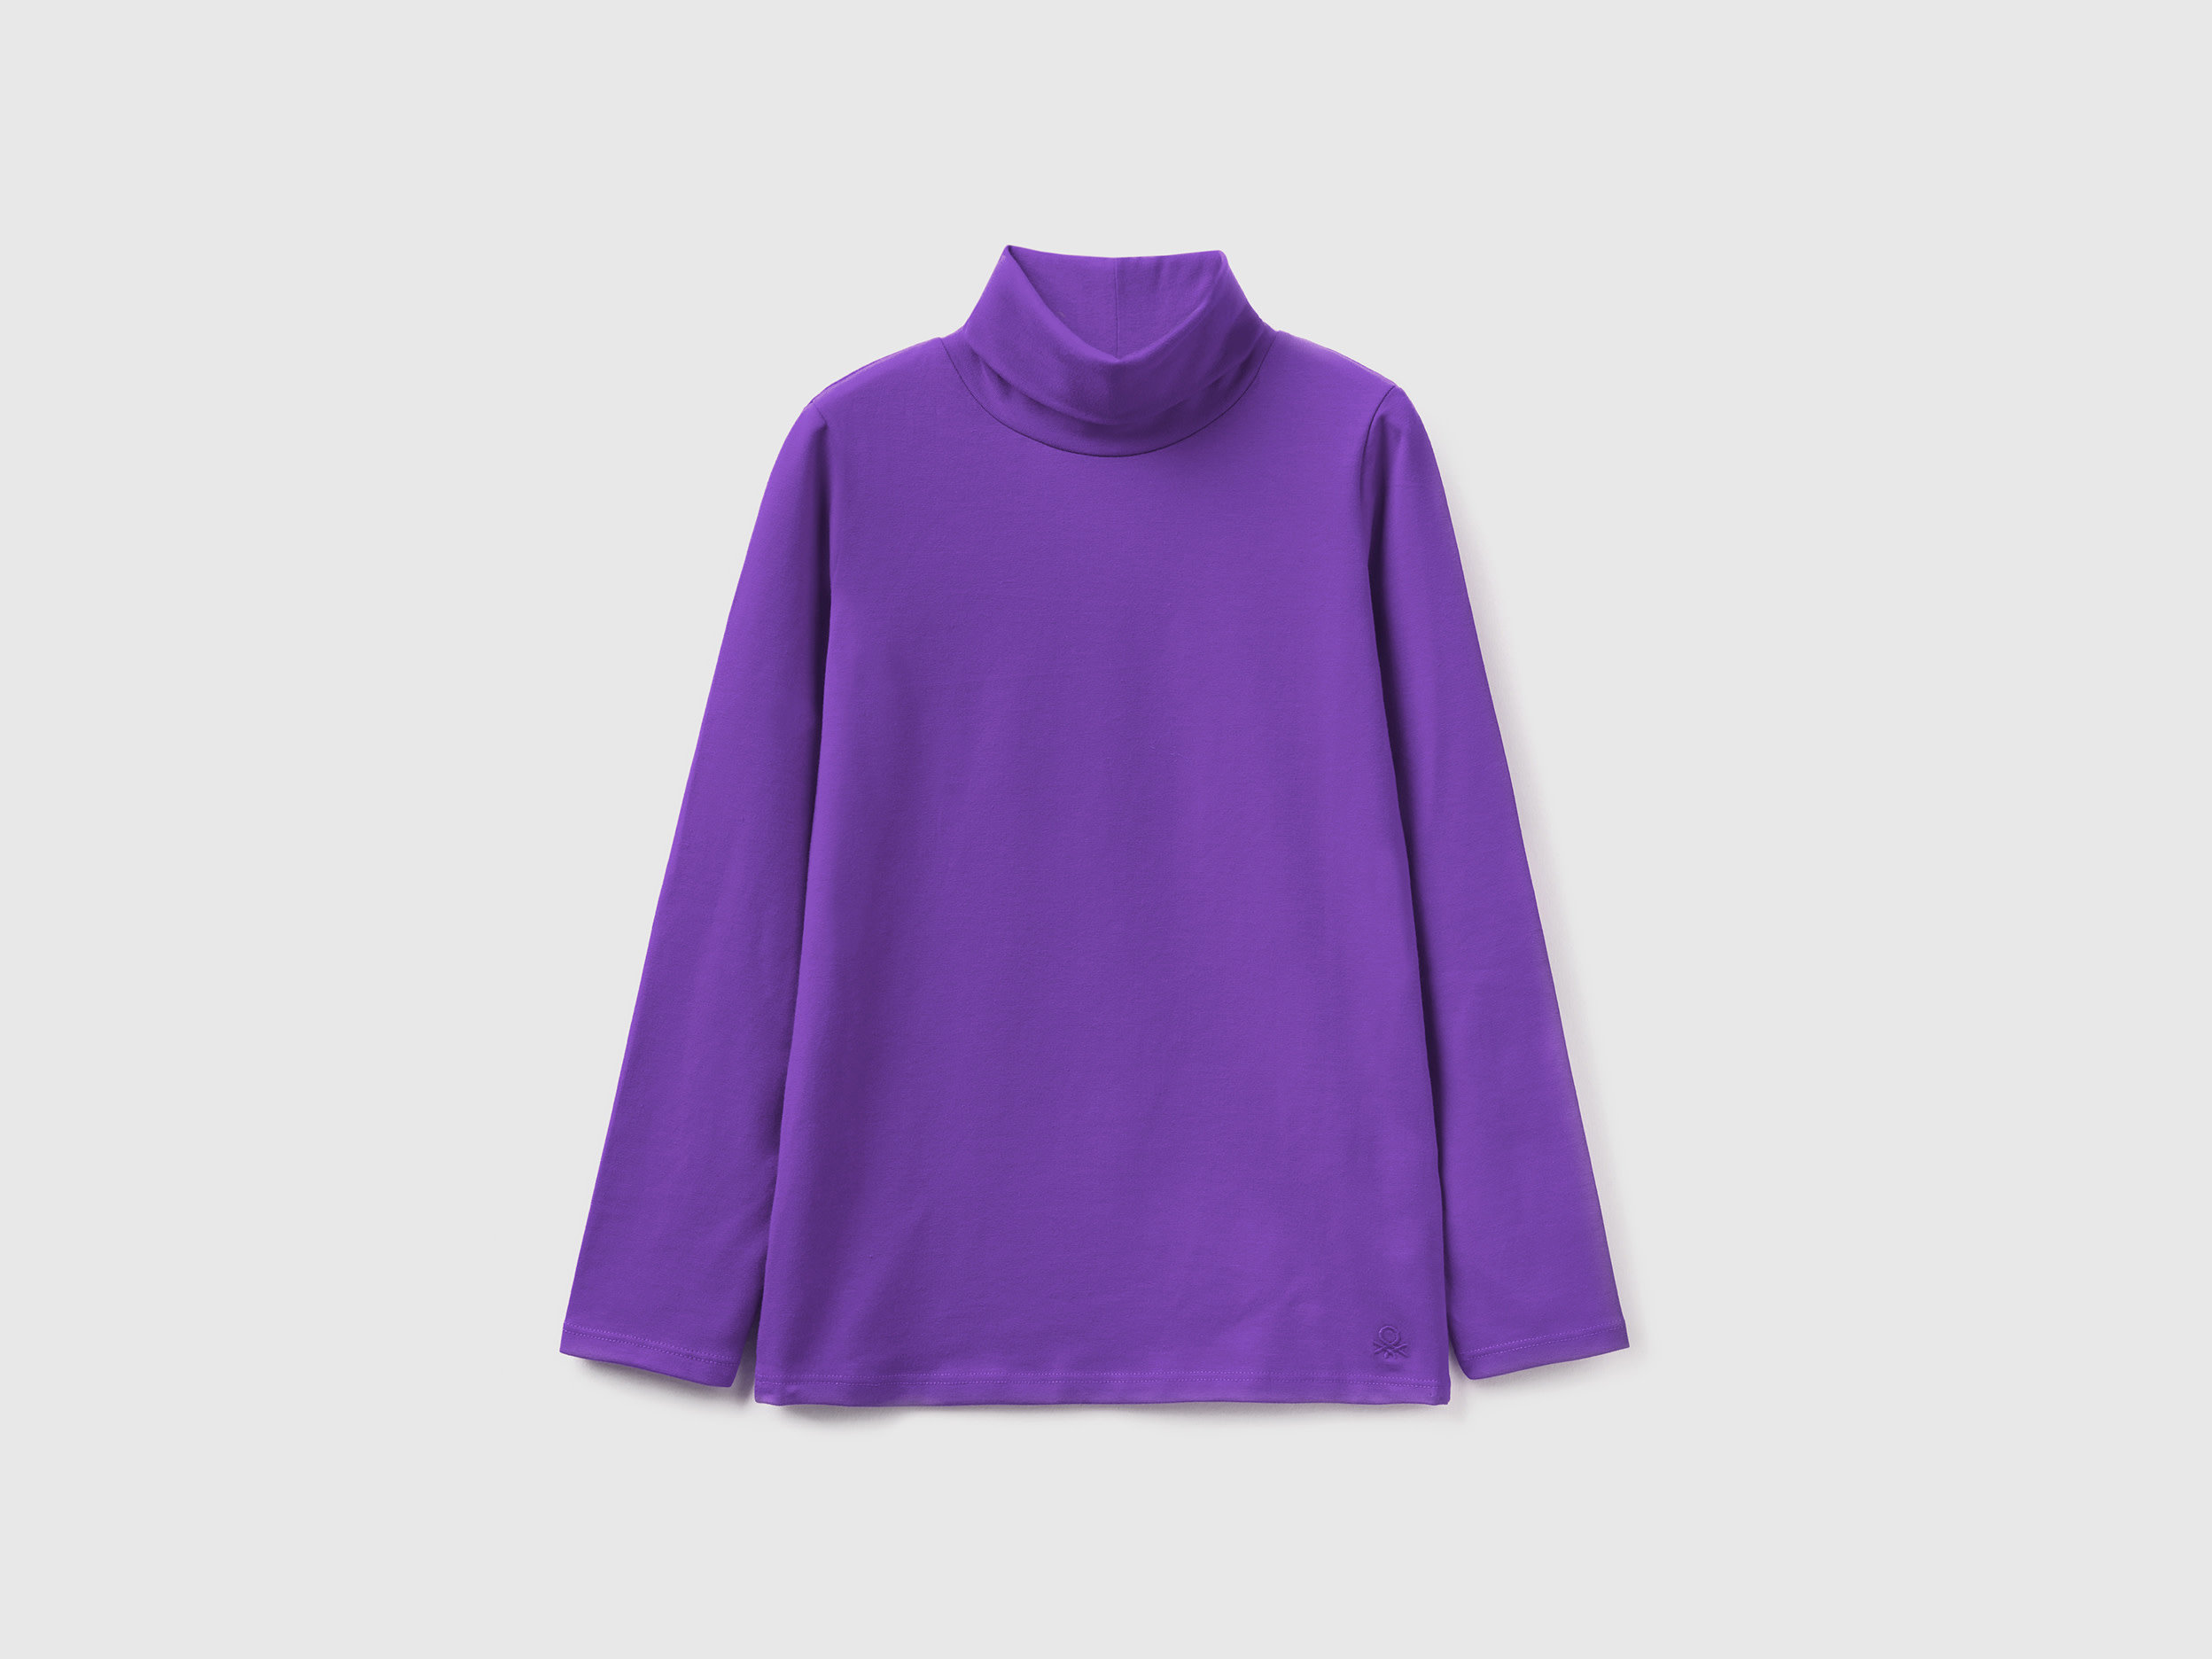 Benetton, Stretch T-shirt With High Neck, size S, Violet, Kids